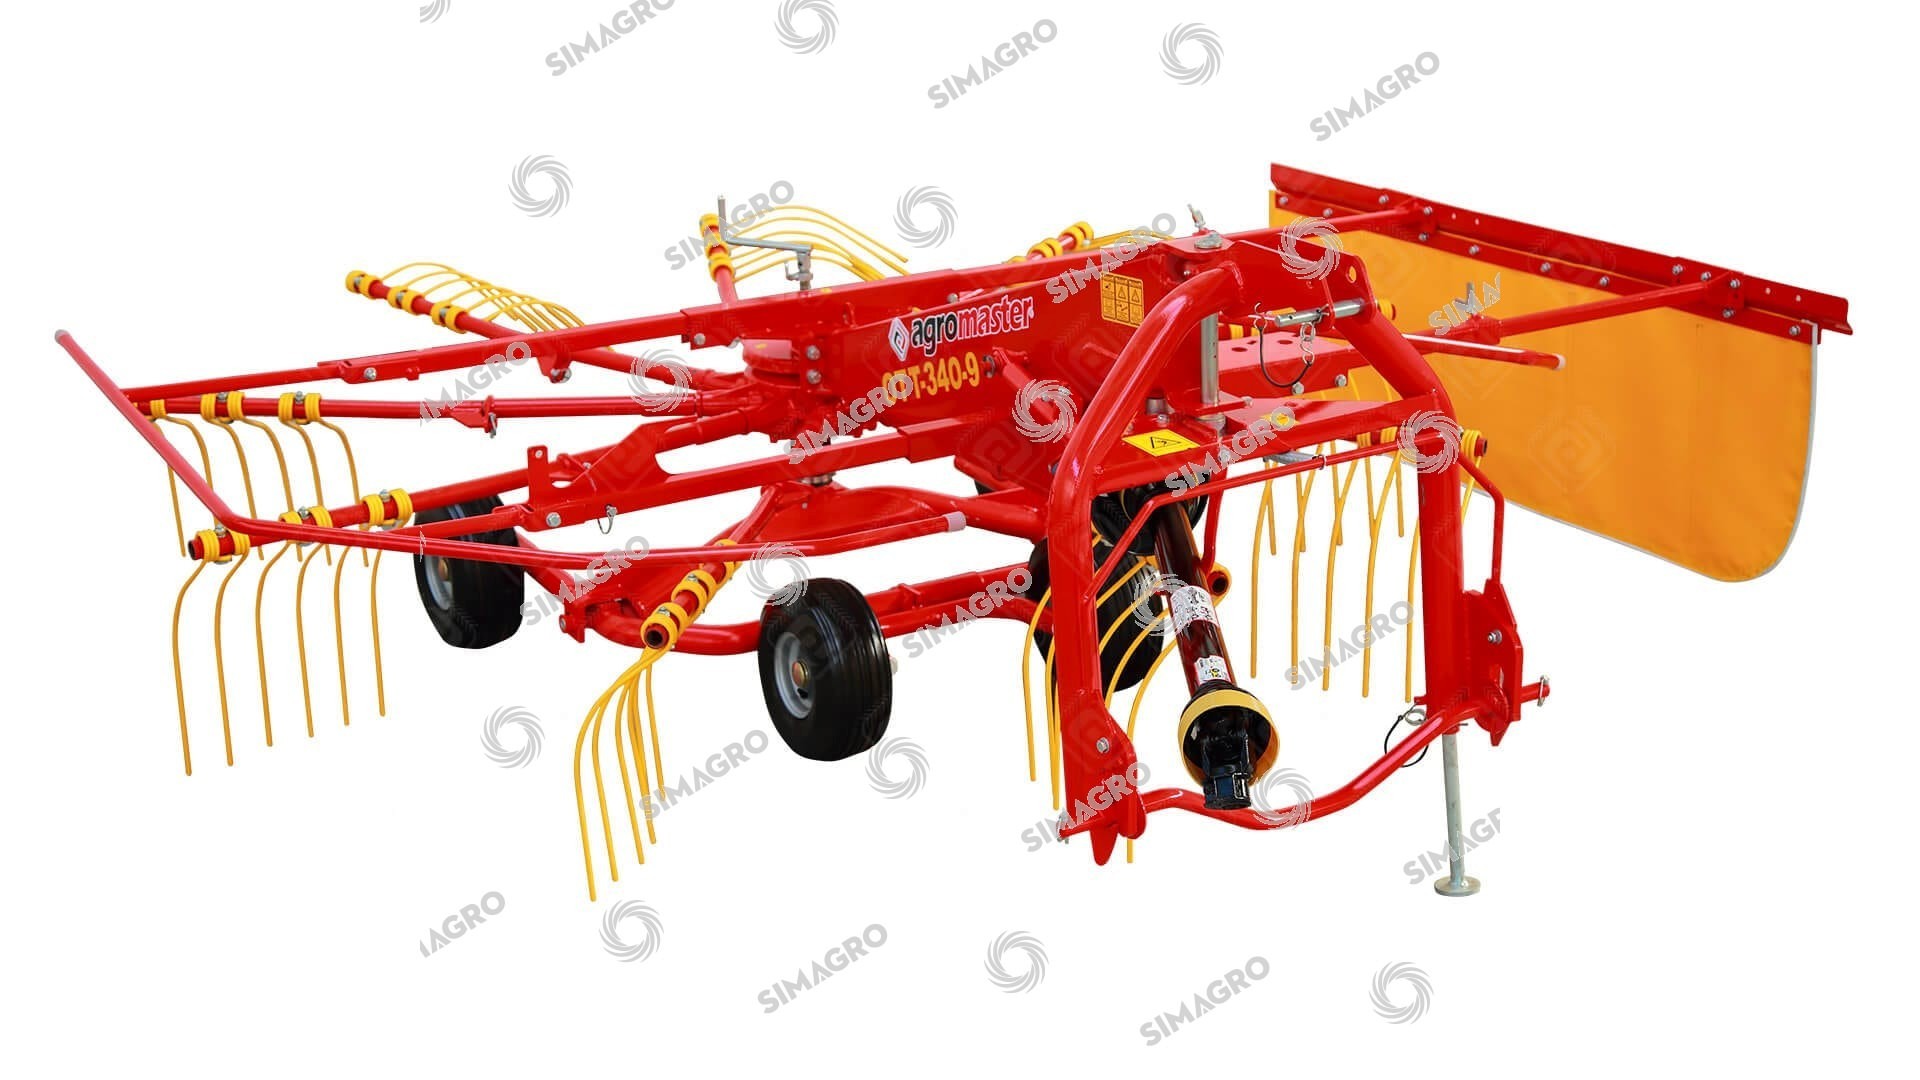 Rotary_Windrower_with_Wheel_(320-344)_Agromaster_1